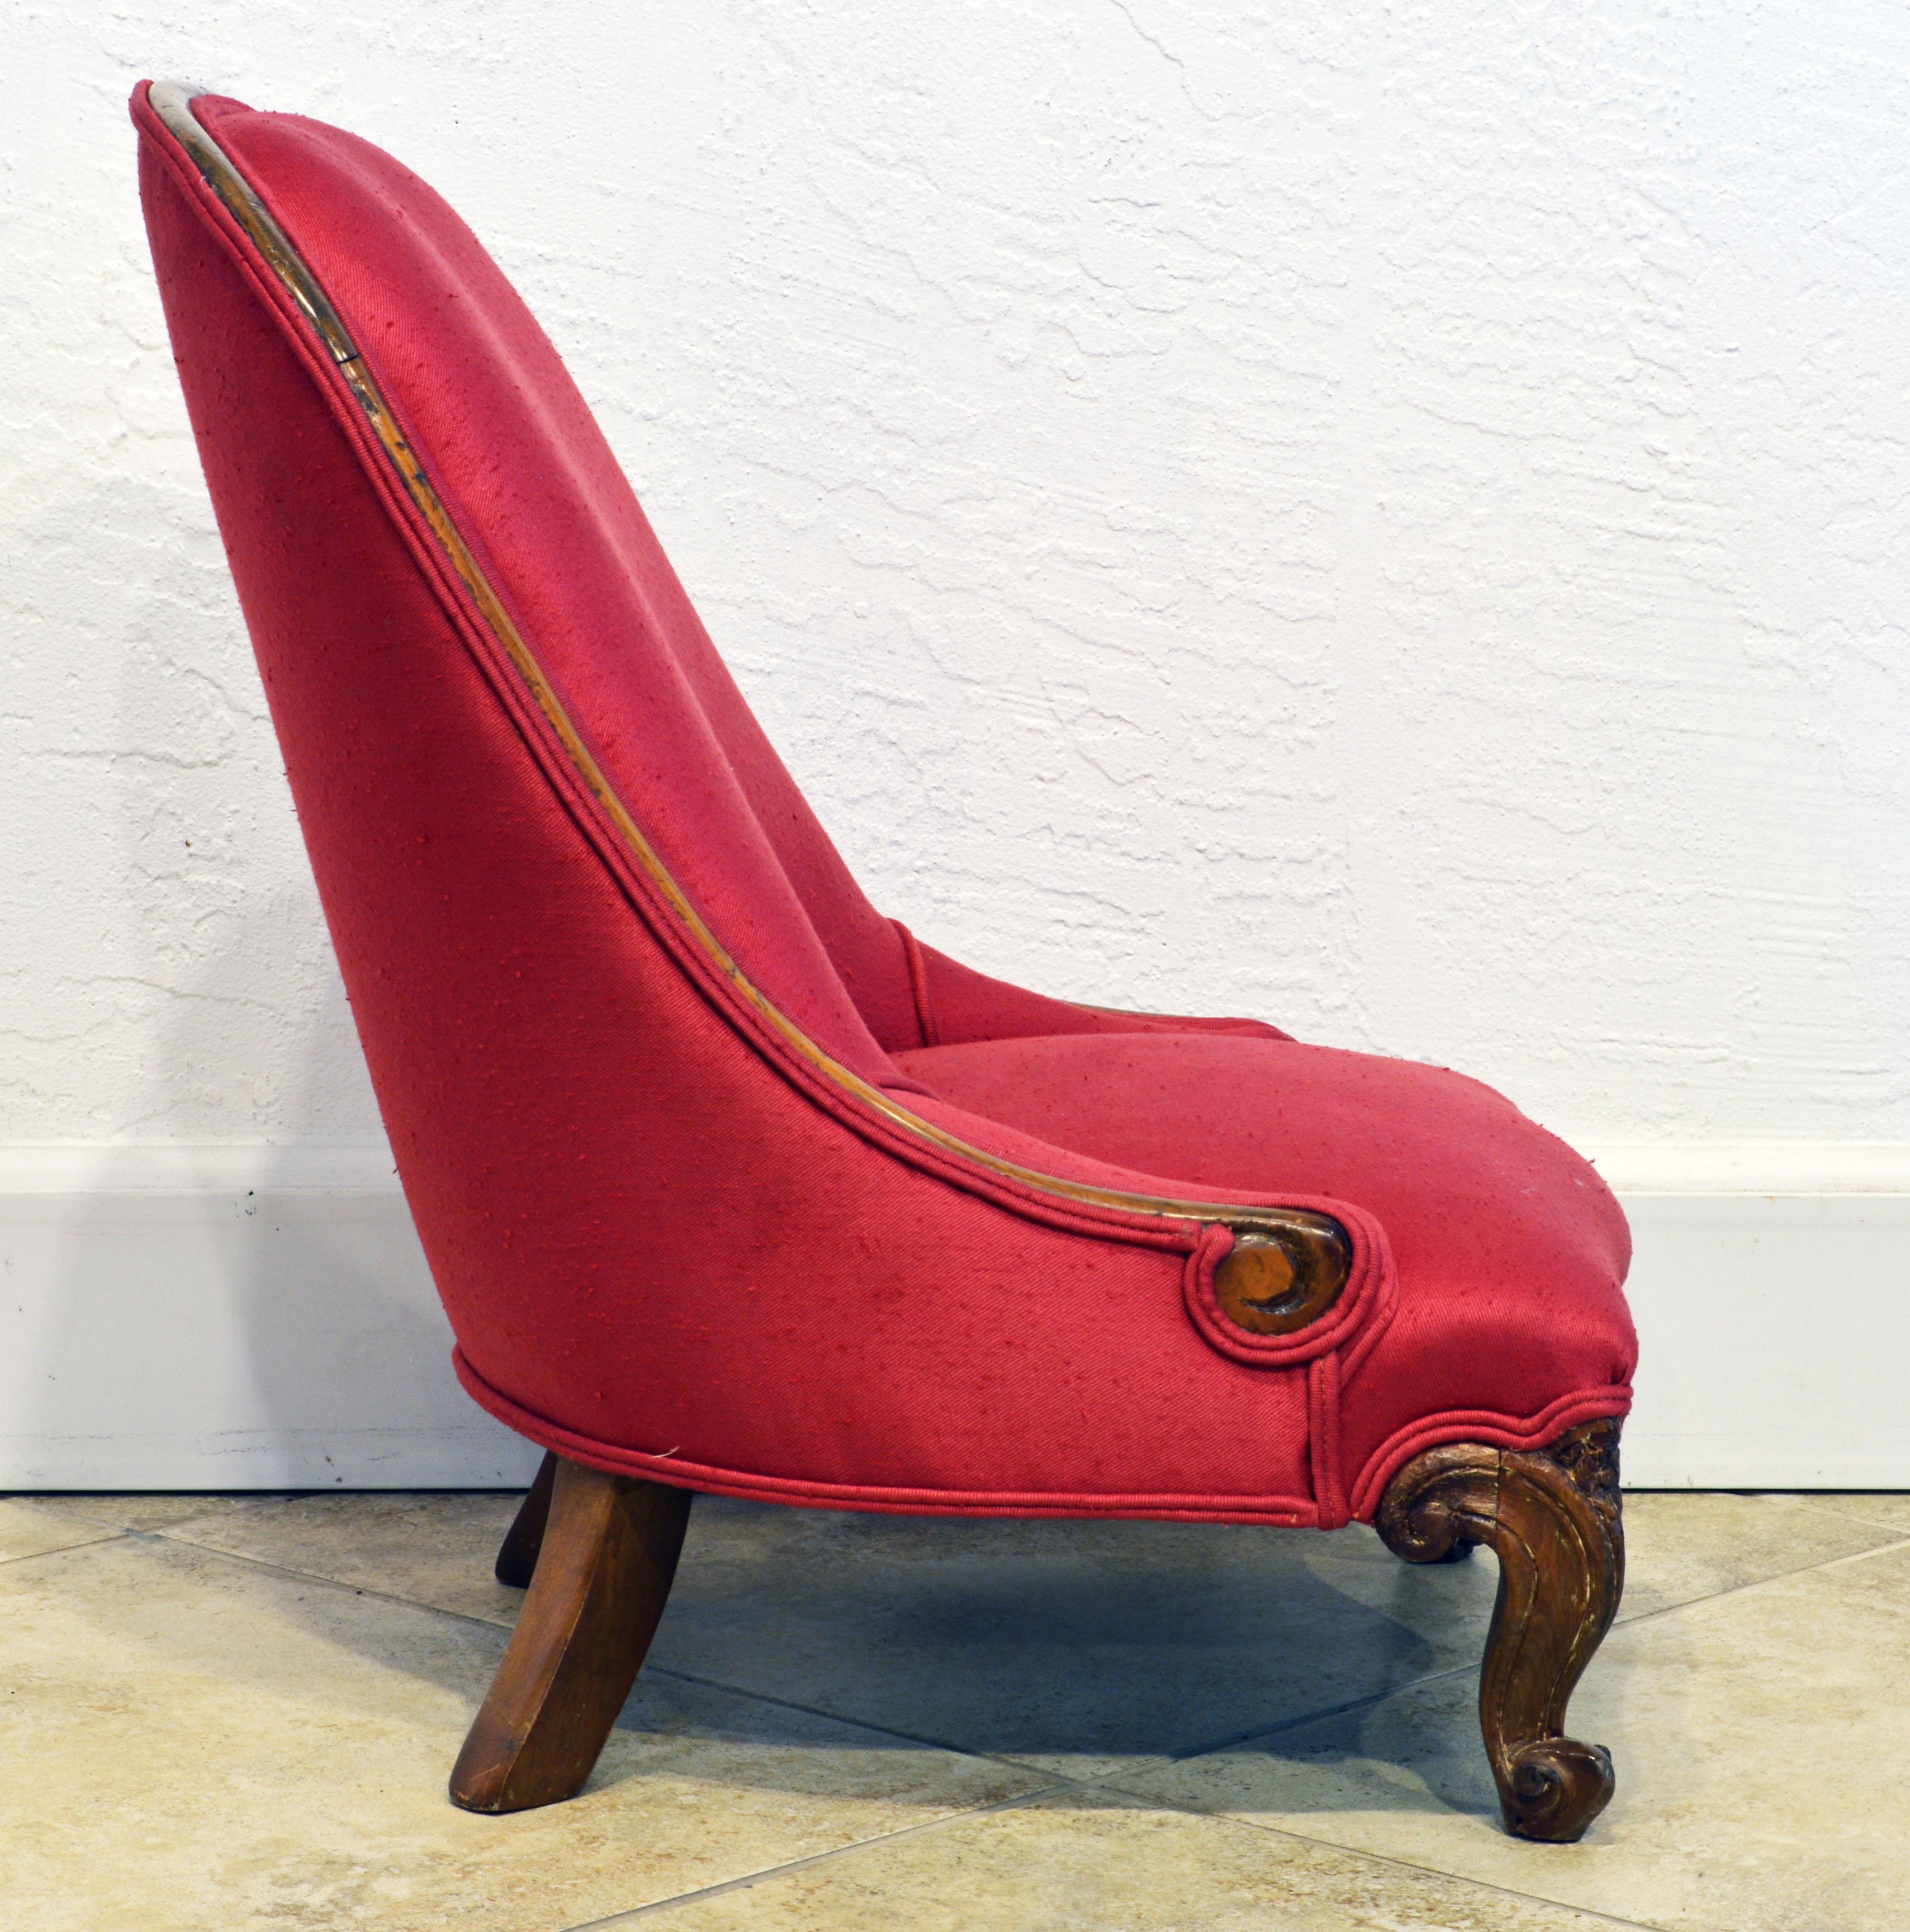 Newly reupholstered in a great color this French Child's Bergere features well carved cabriole legs and apron supporting the seat and an elegant curved backrest.